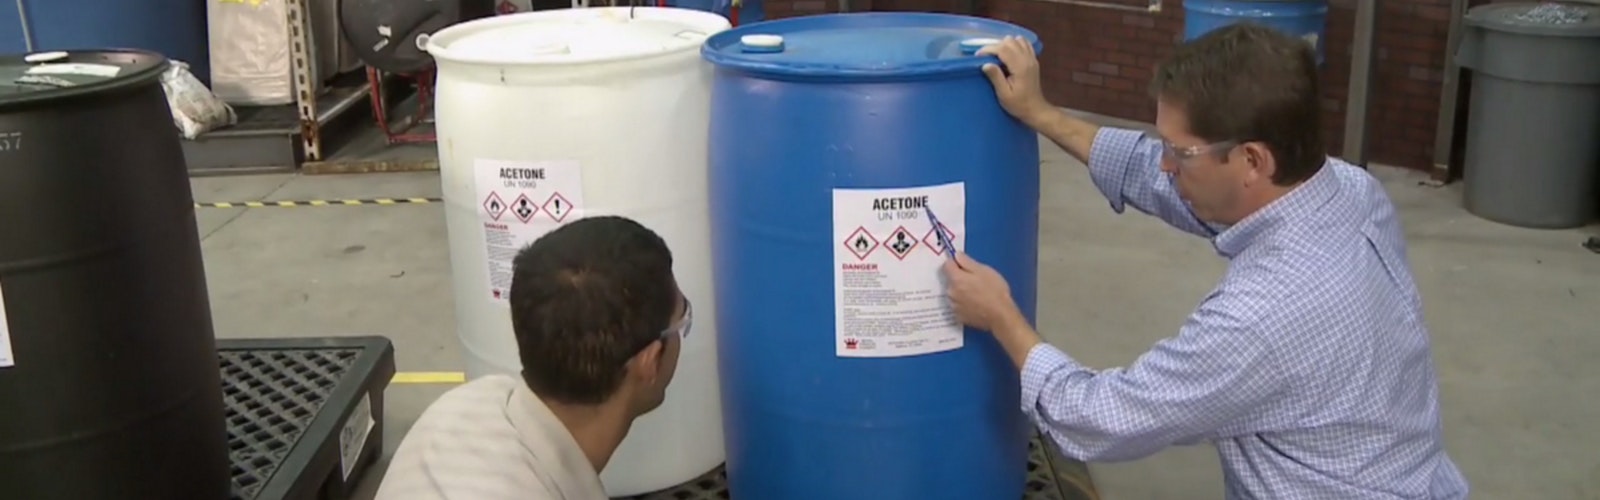 A Quick And Easy Breakdown Of Hazardous Chemical Labels